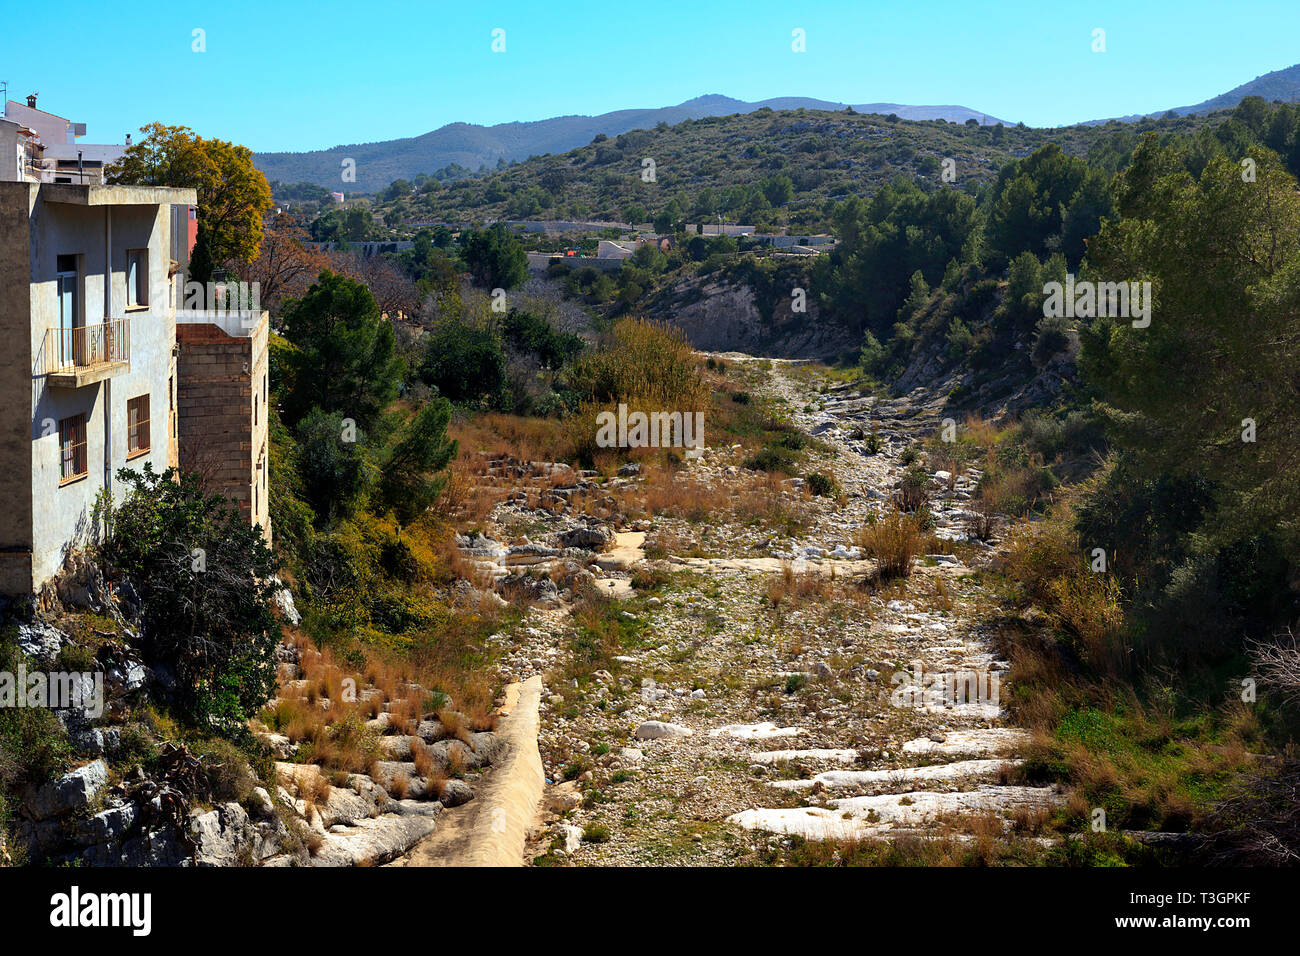 Dry River Bed in the gorge at Gata de Gorges in the Province of Alicante, Spain Stock Photo